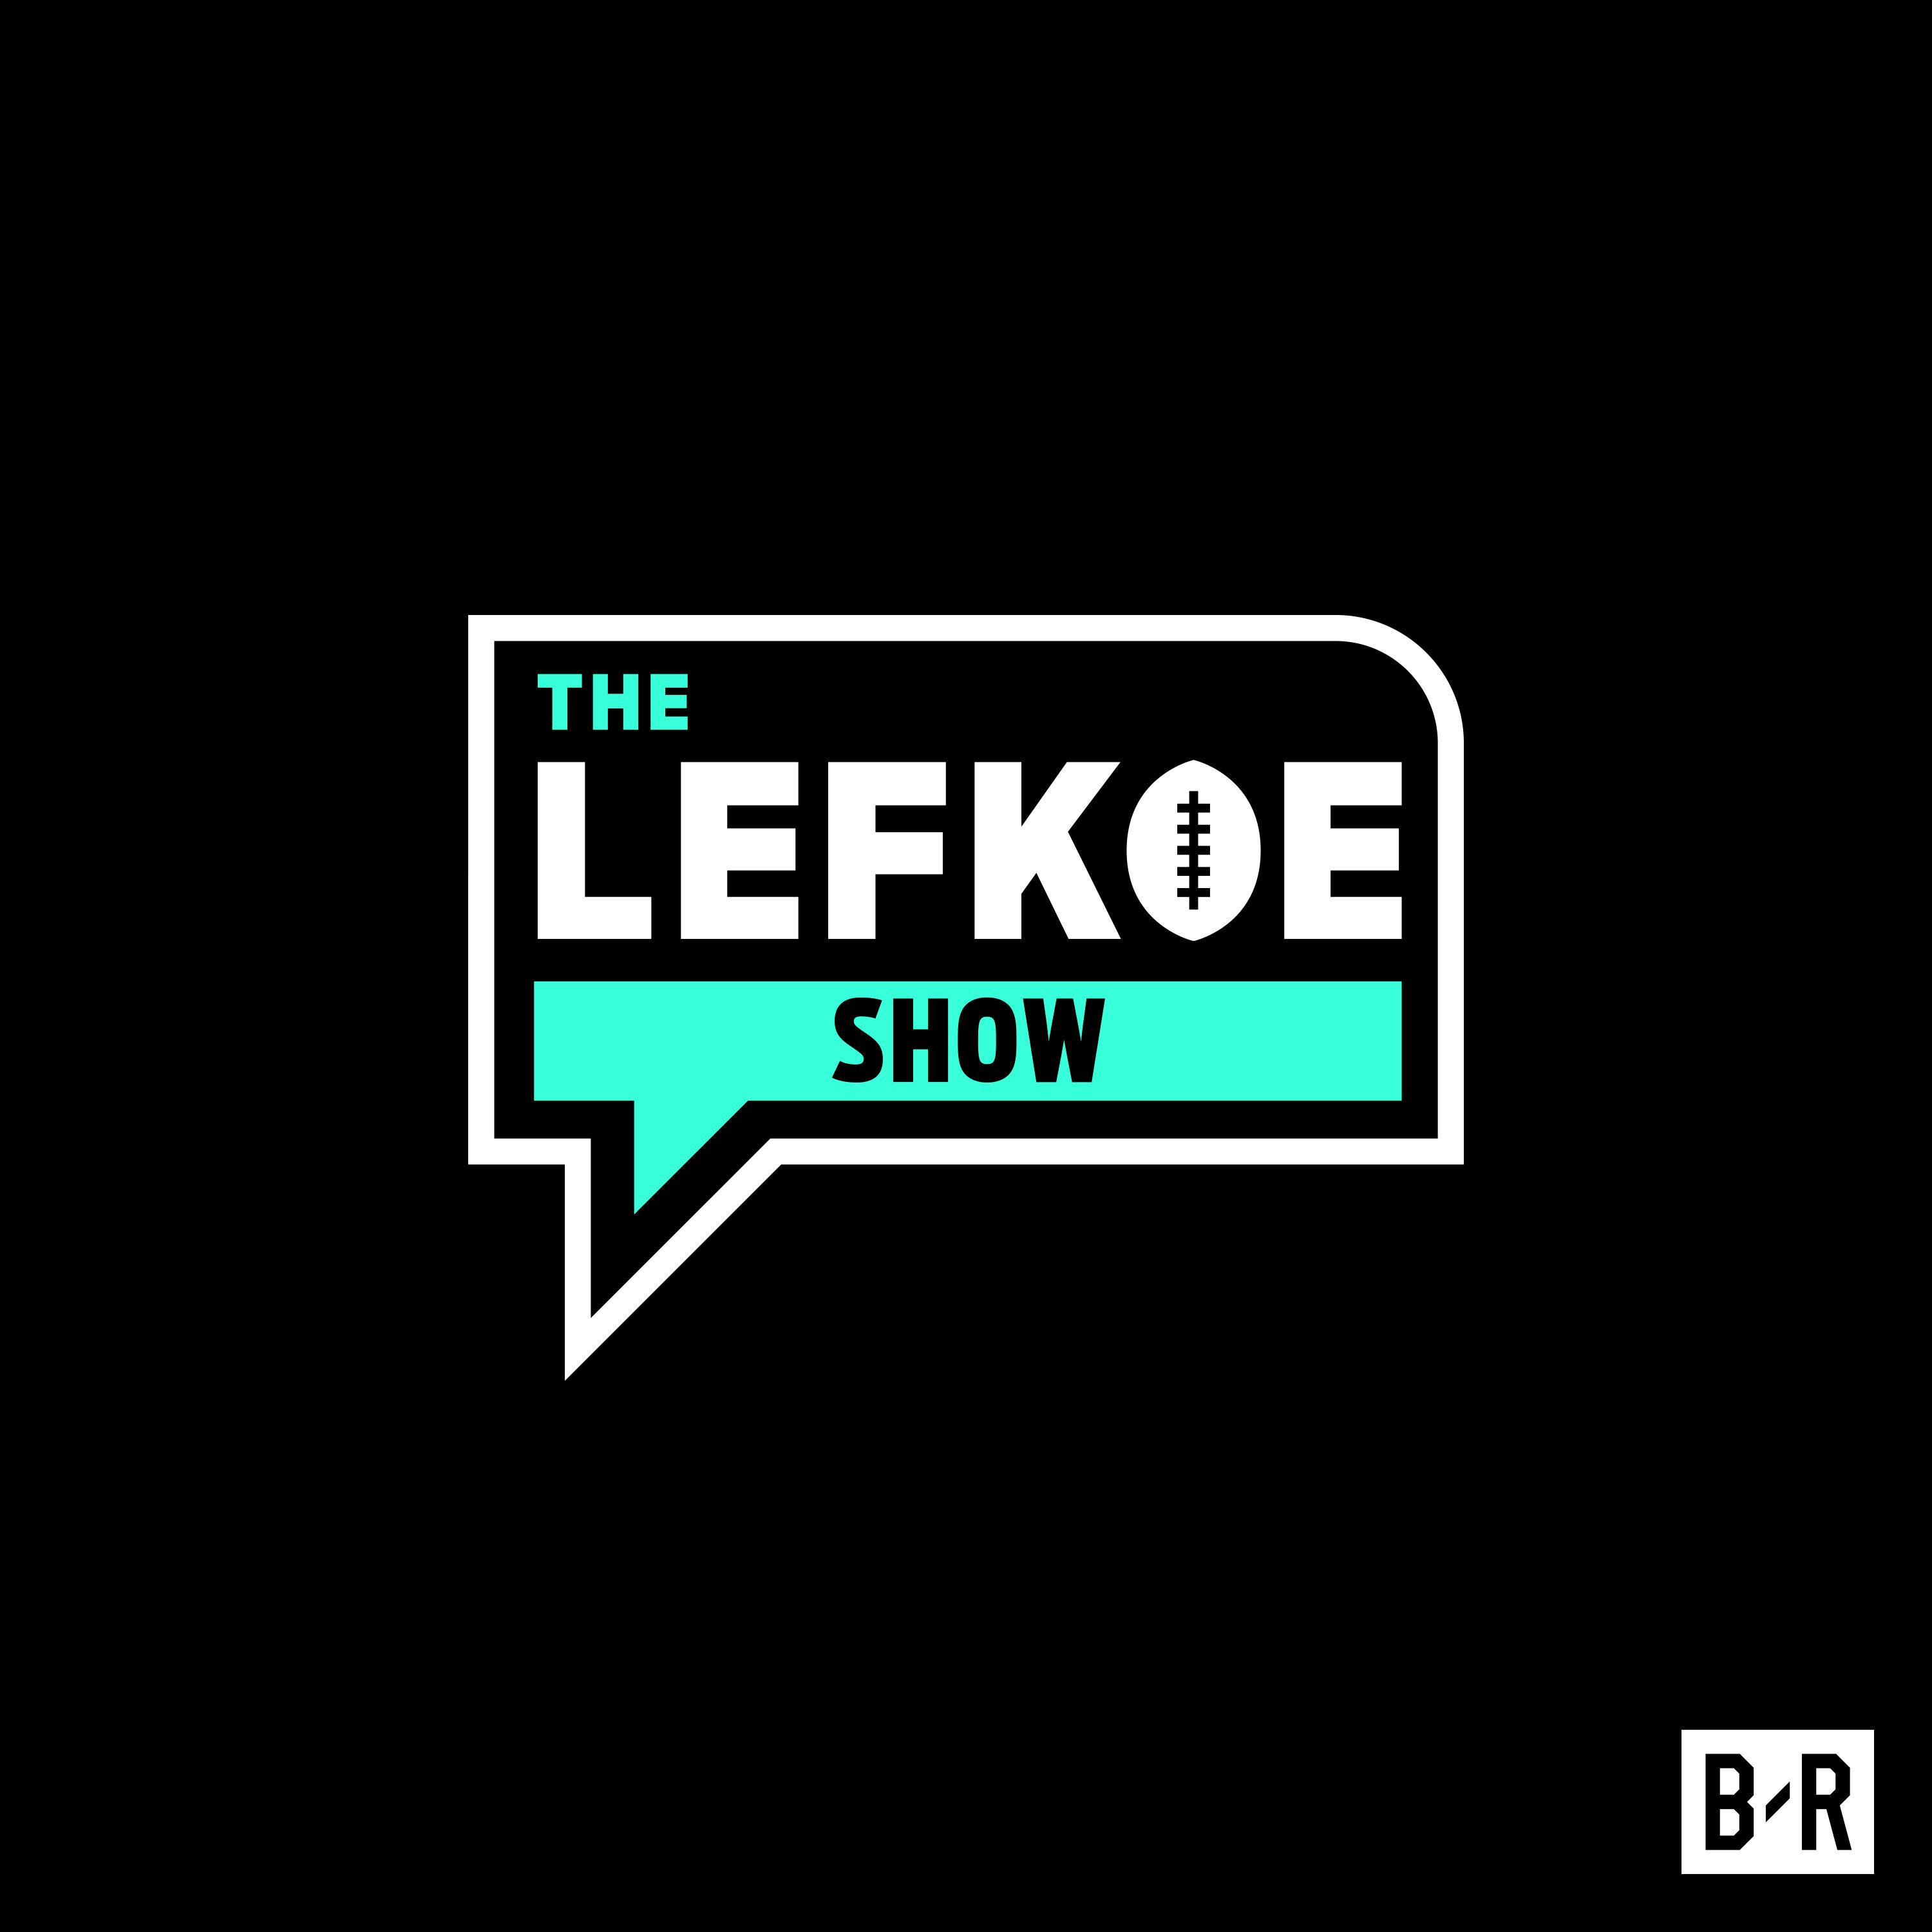 Chris from House of Jordans and Cardladder on Card Market Inefficiencies, Going Vintage, and the Luka Bubble | The Lefkoe Show